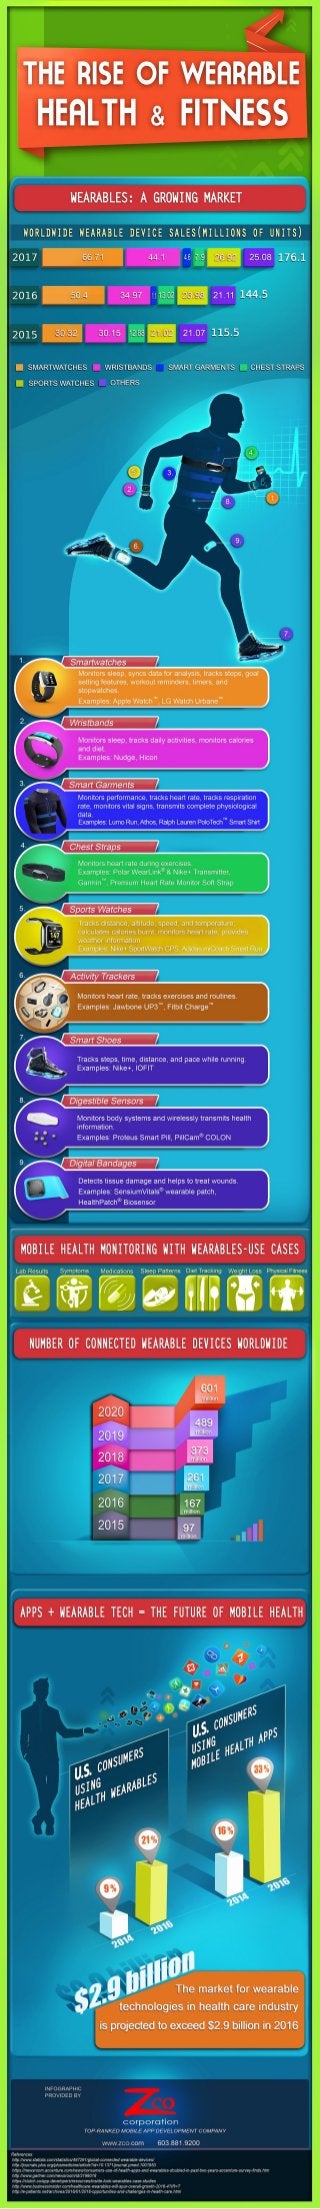 Wearable Technology in Health and Fitness - Infographic